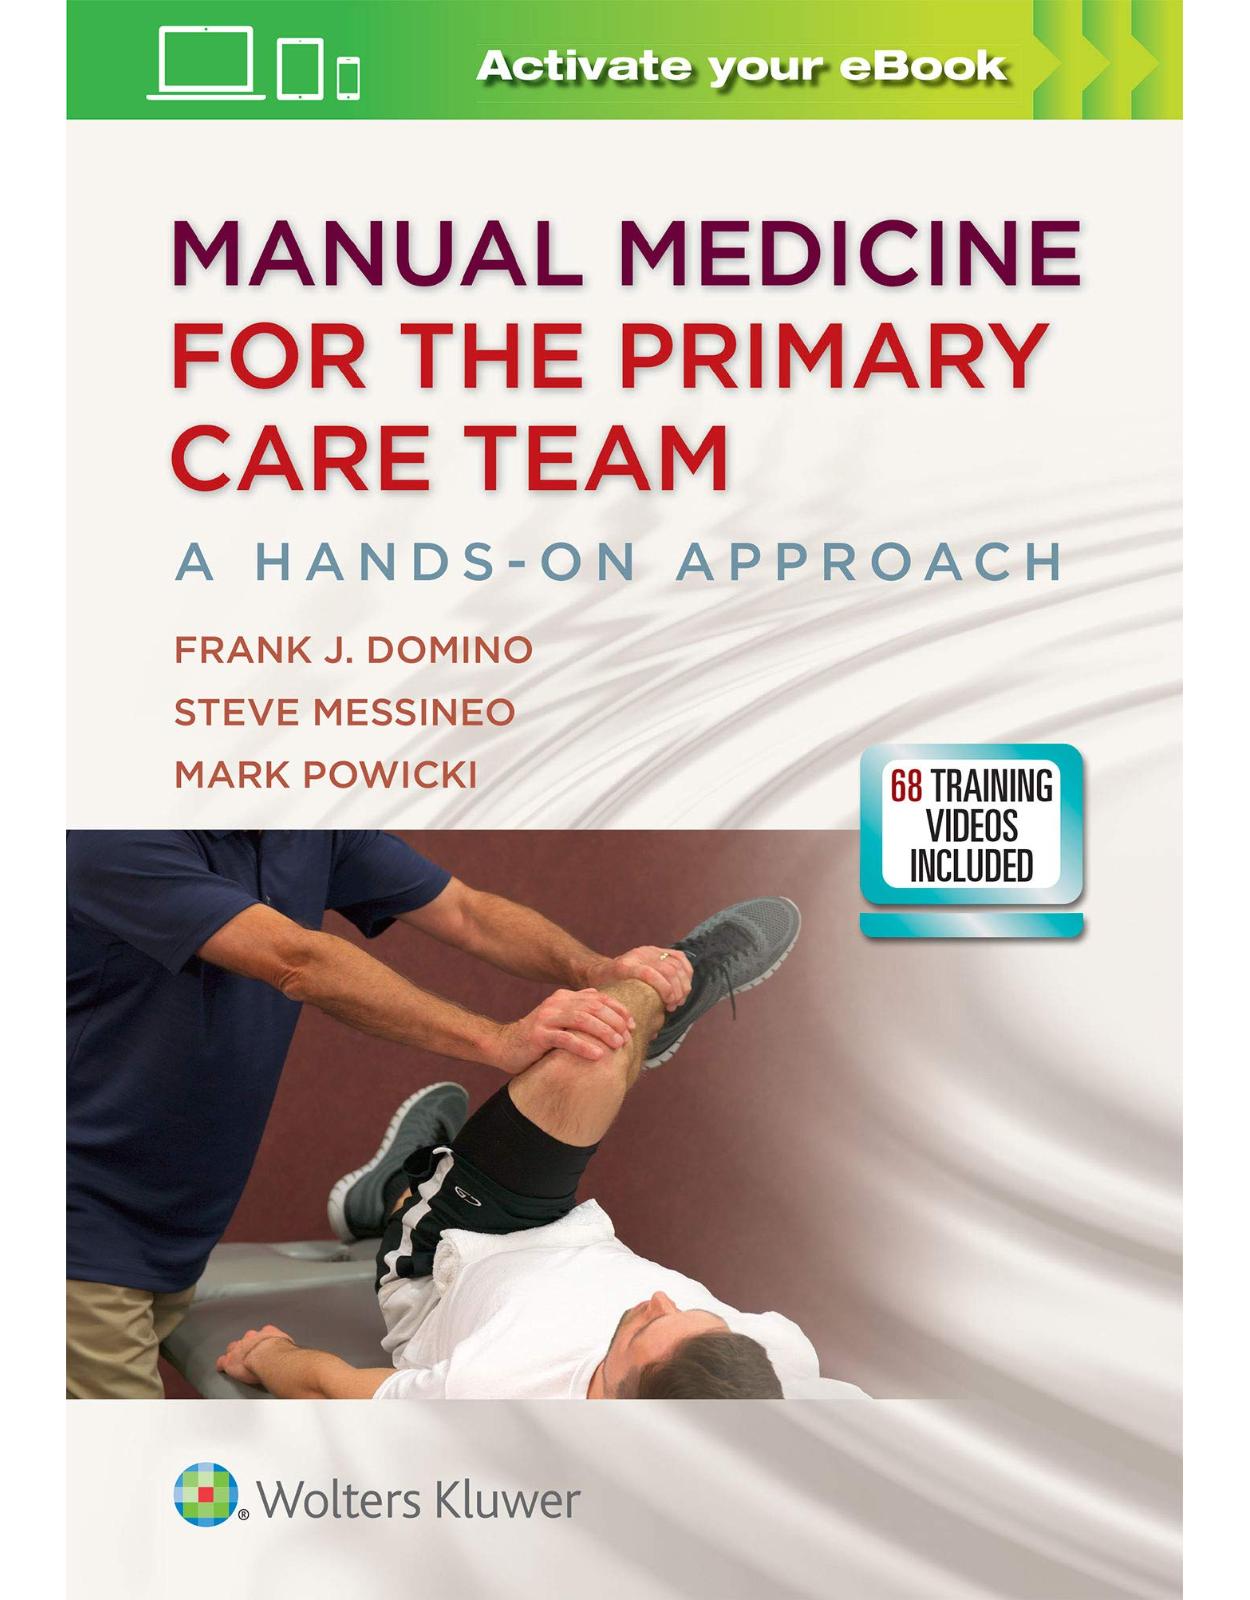 Manual Medicine for the Primary Care Team: A Hands-On Approach 